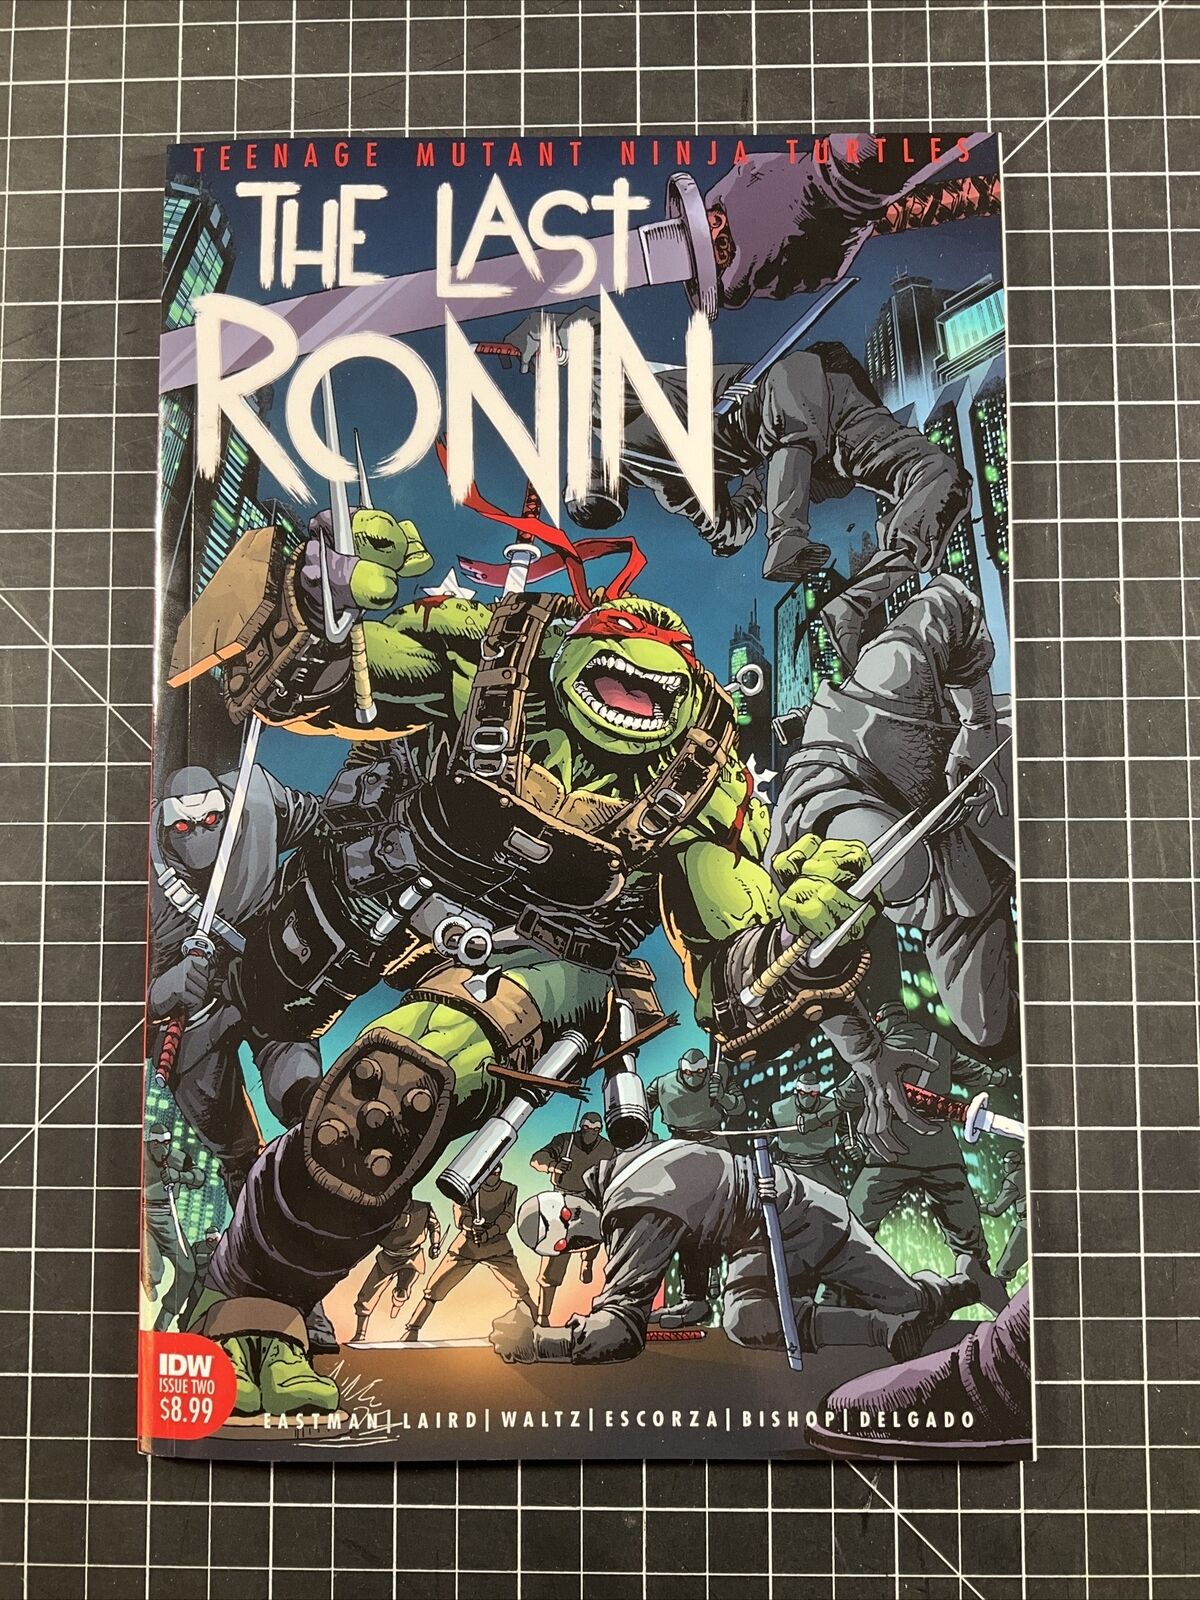 TNMT Teenage Ninja Mutant Turtles The Last Ronin #2. GREAT CONDITION. COVER A